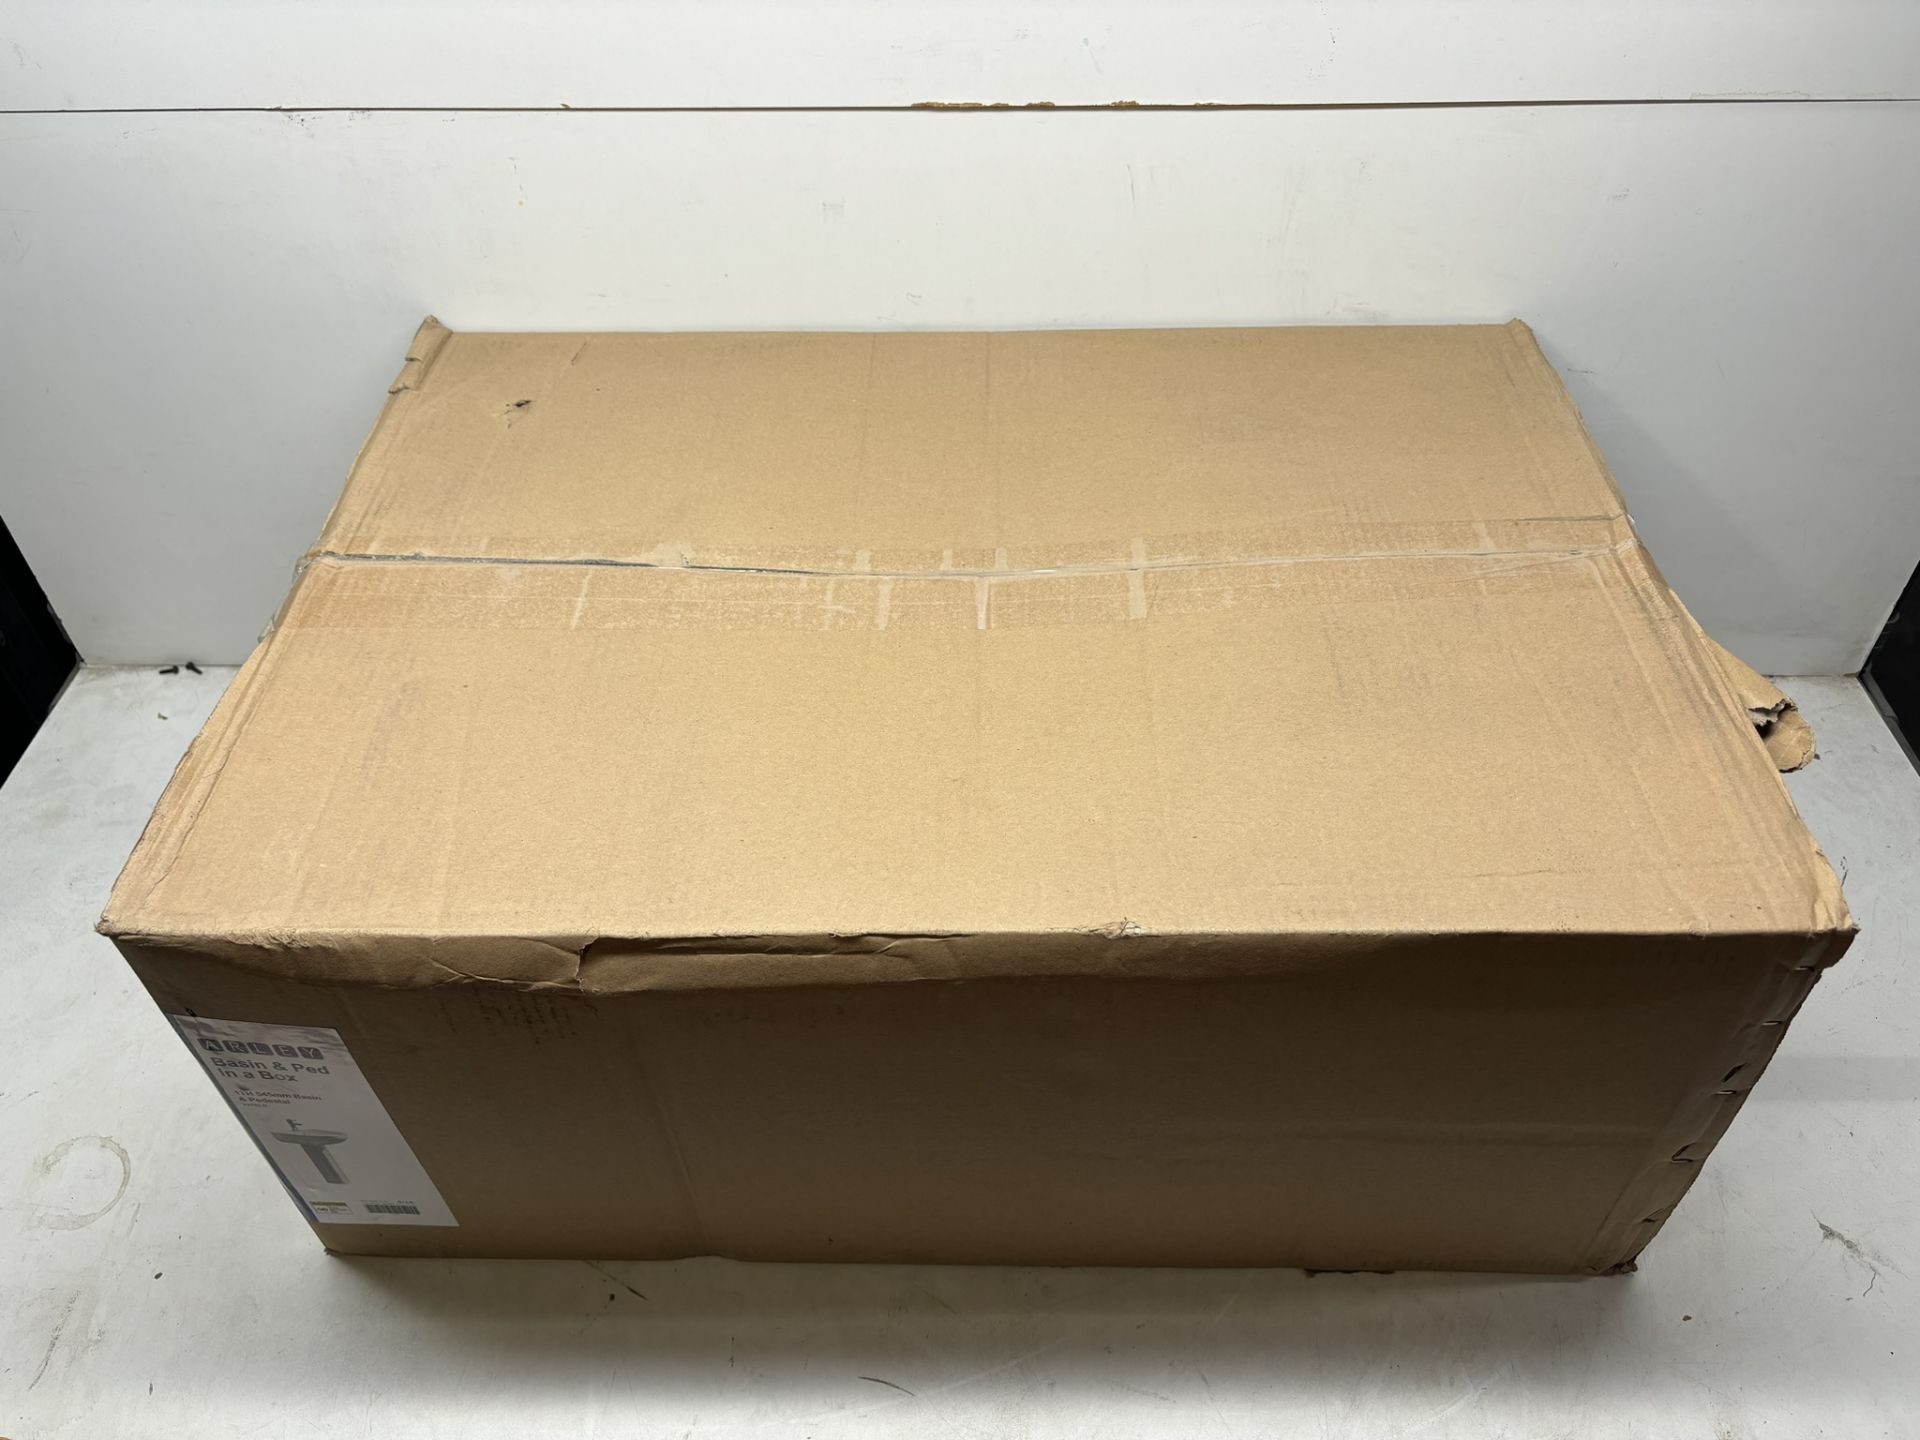 Arley 23702-D 1 Tap Hole 545mm Basin & Pedestal In A Box - Image 6 of 9